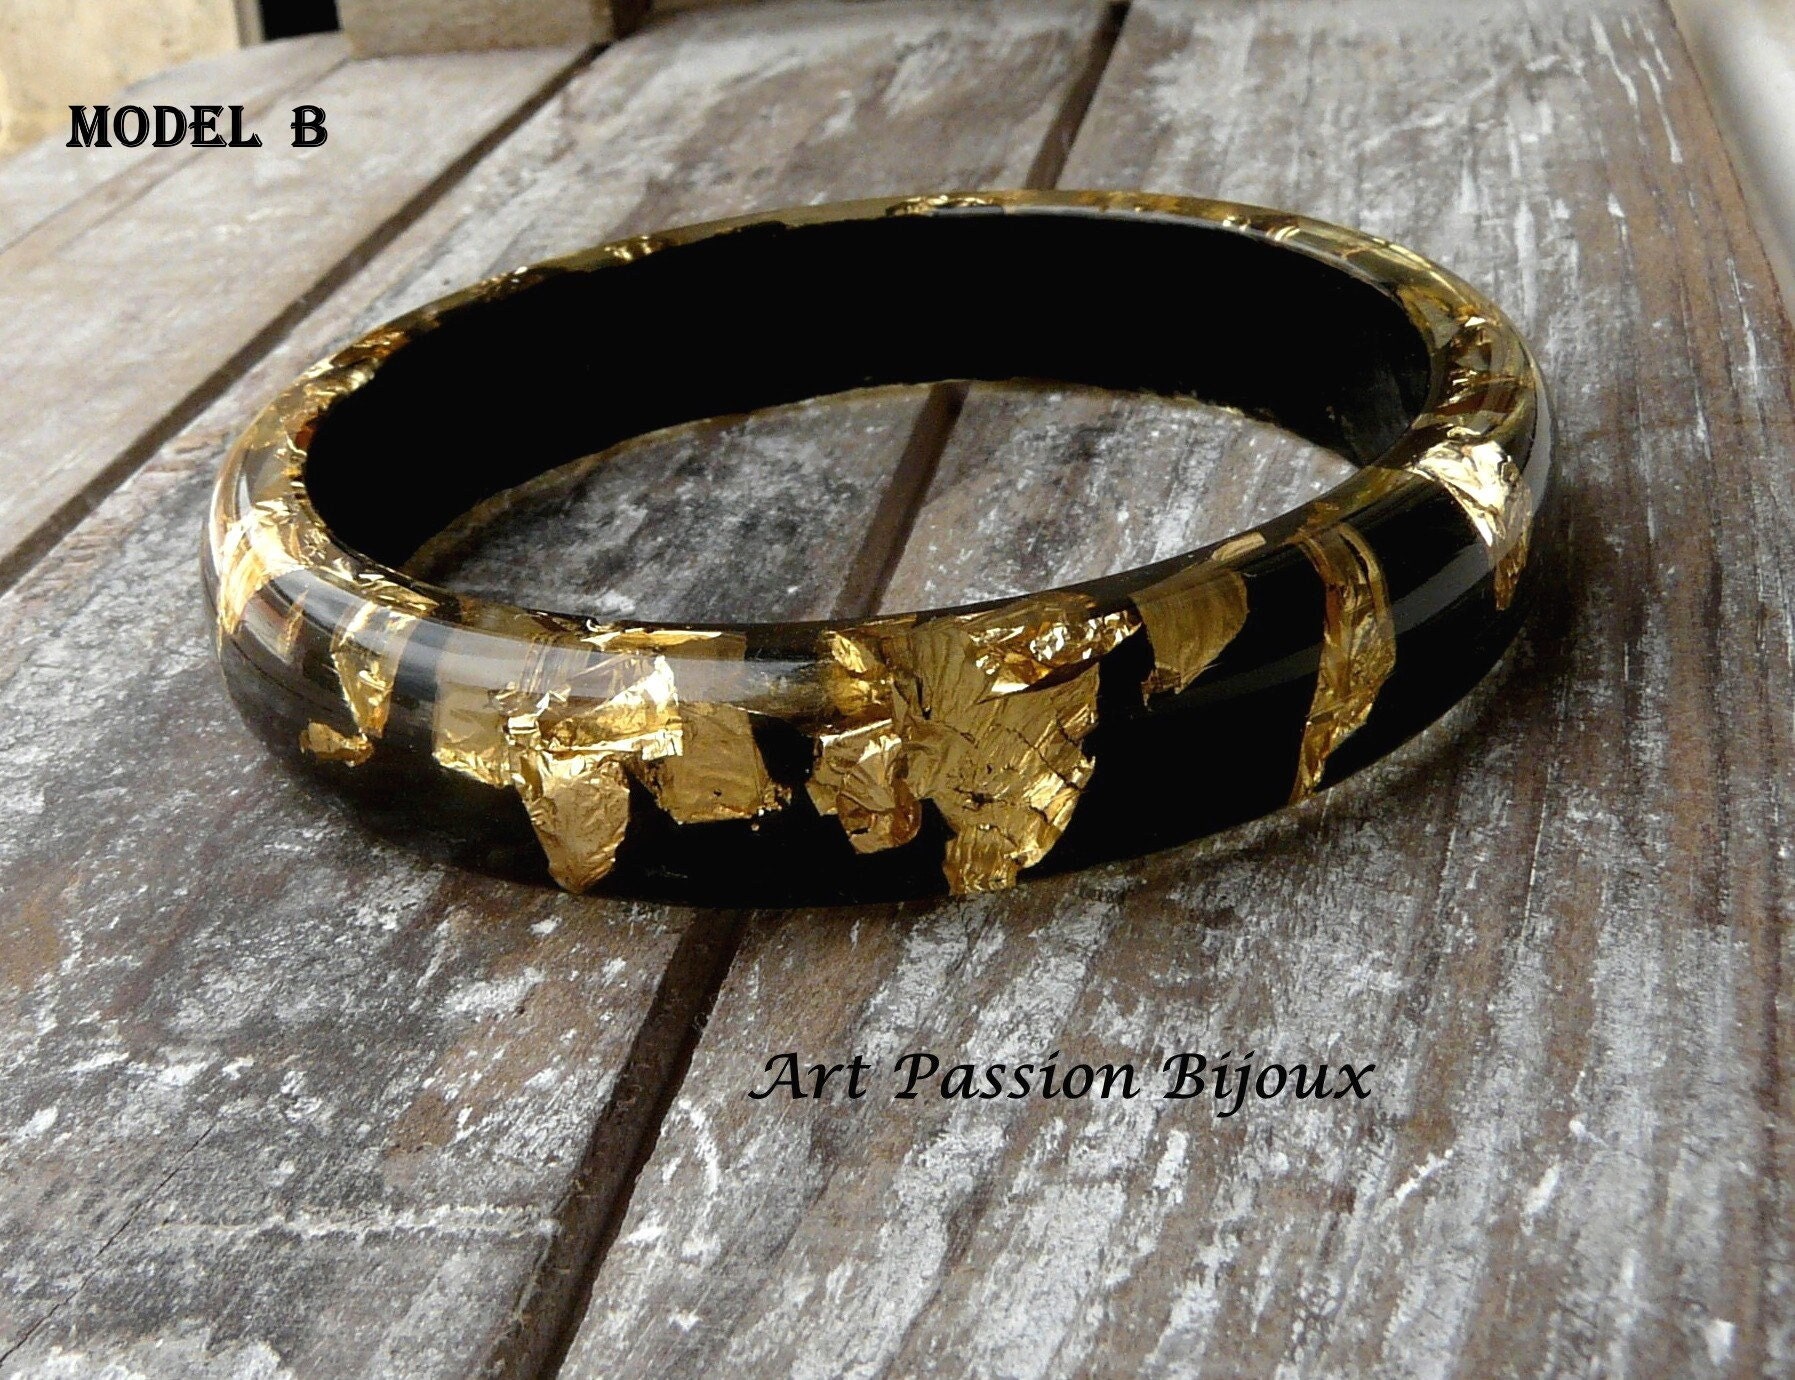 Clear Ecoresin Bangle Style Bracelet with Gold Tone Metallic Foil